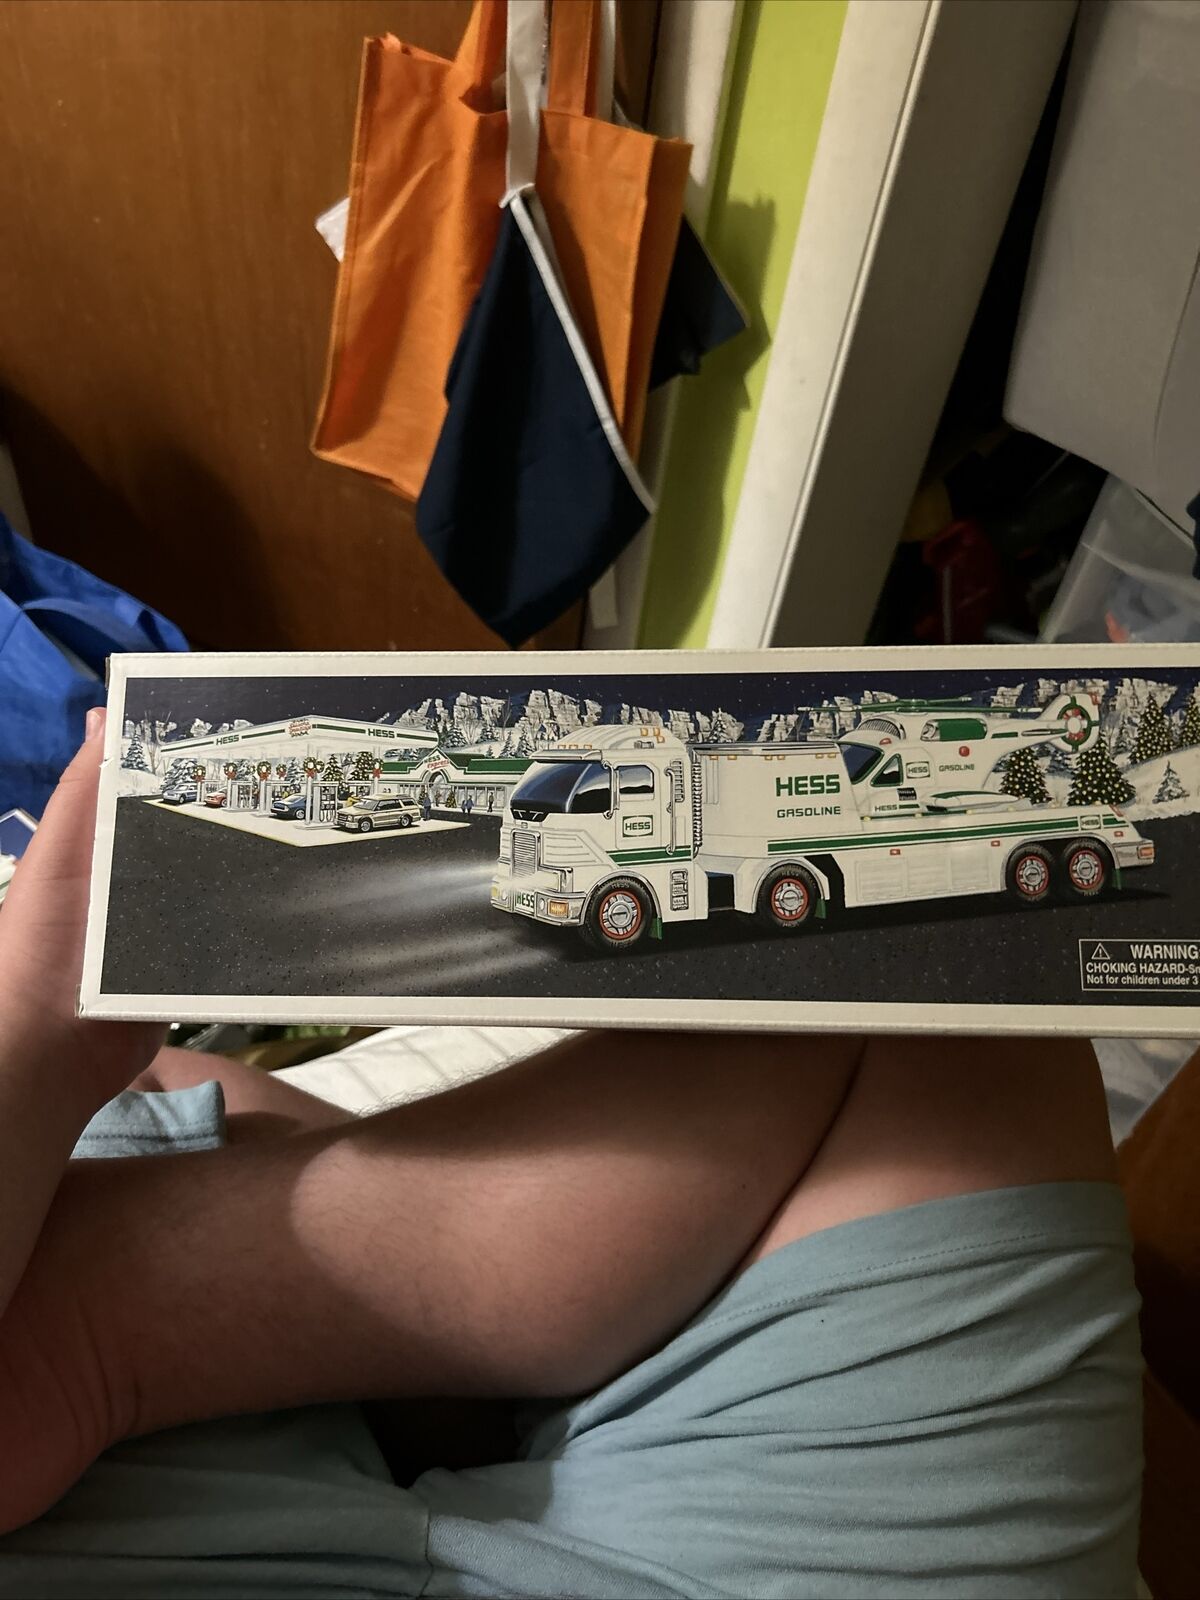 New in Box 2006 HESS TOY TRUCK AND HELICOPTER White Green In Original Packaging